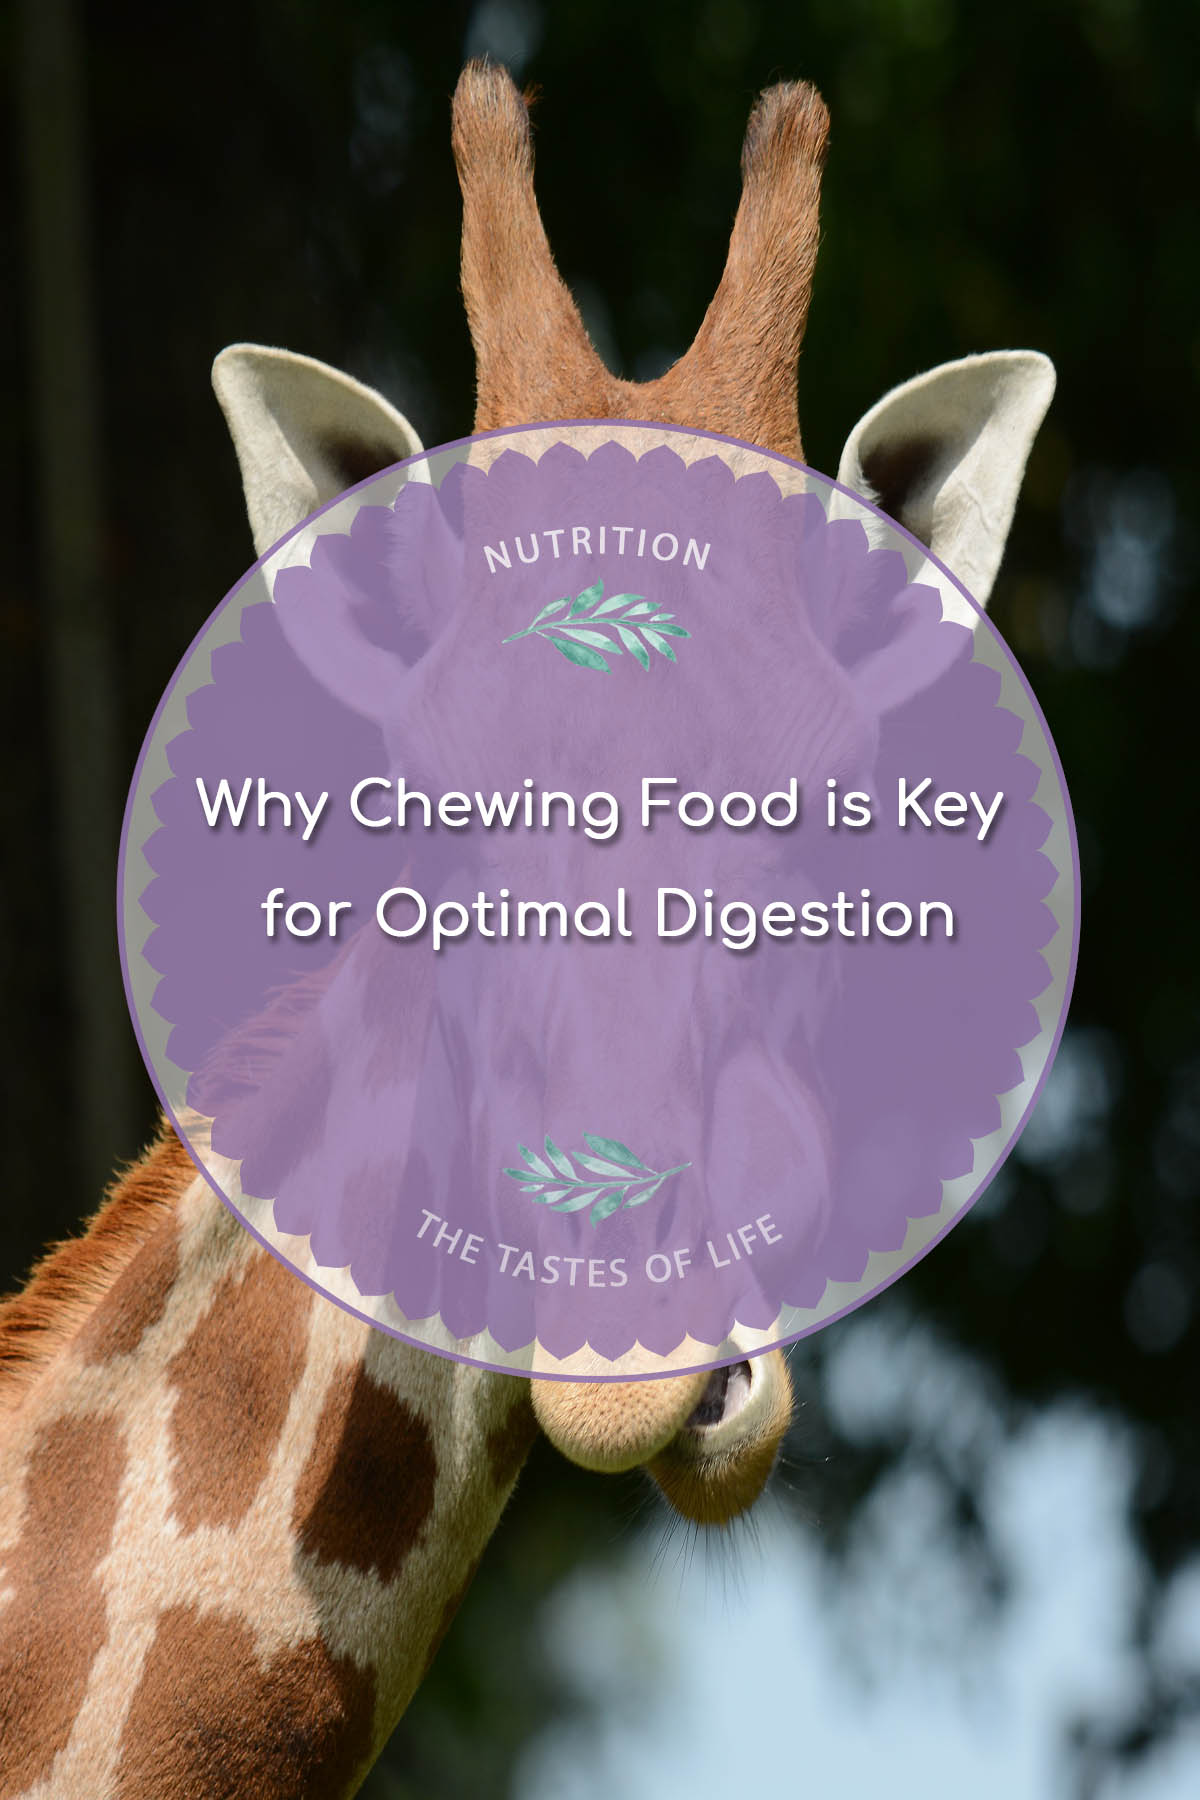 Why Chewing Food is Key for Optimal Digestion